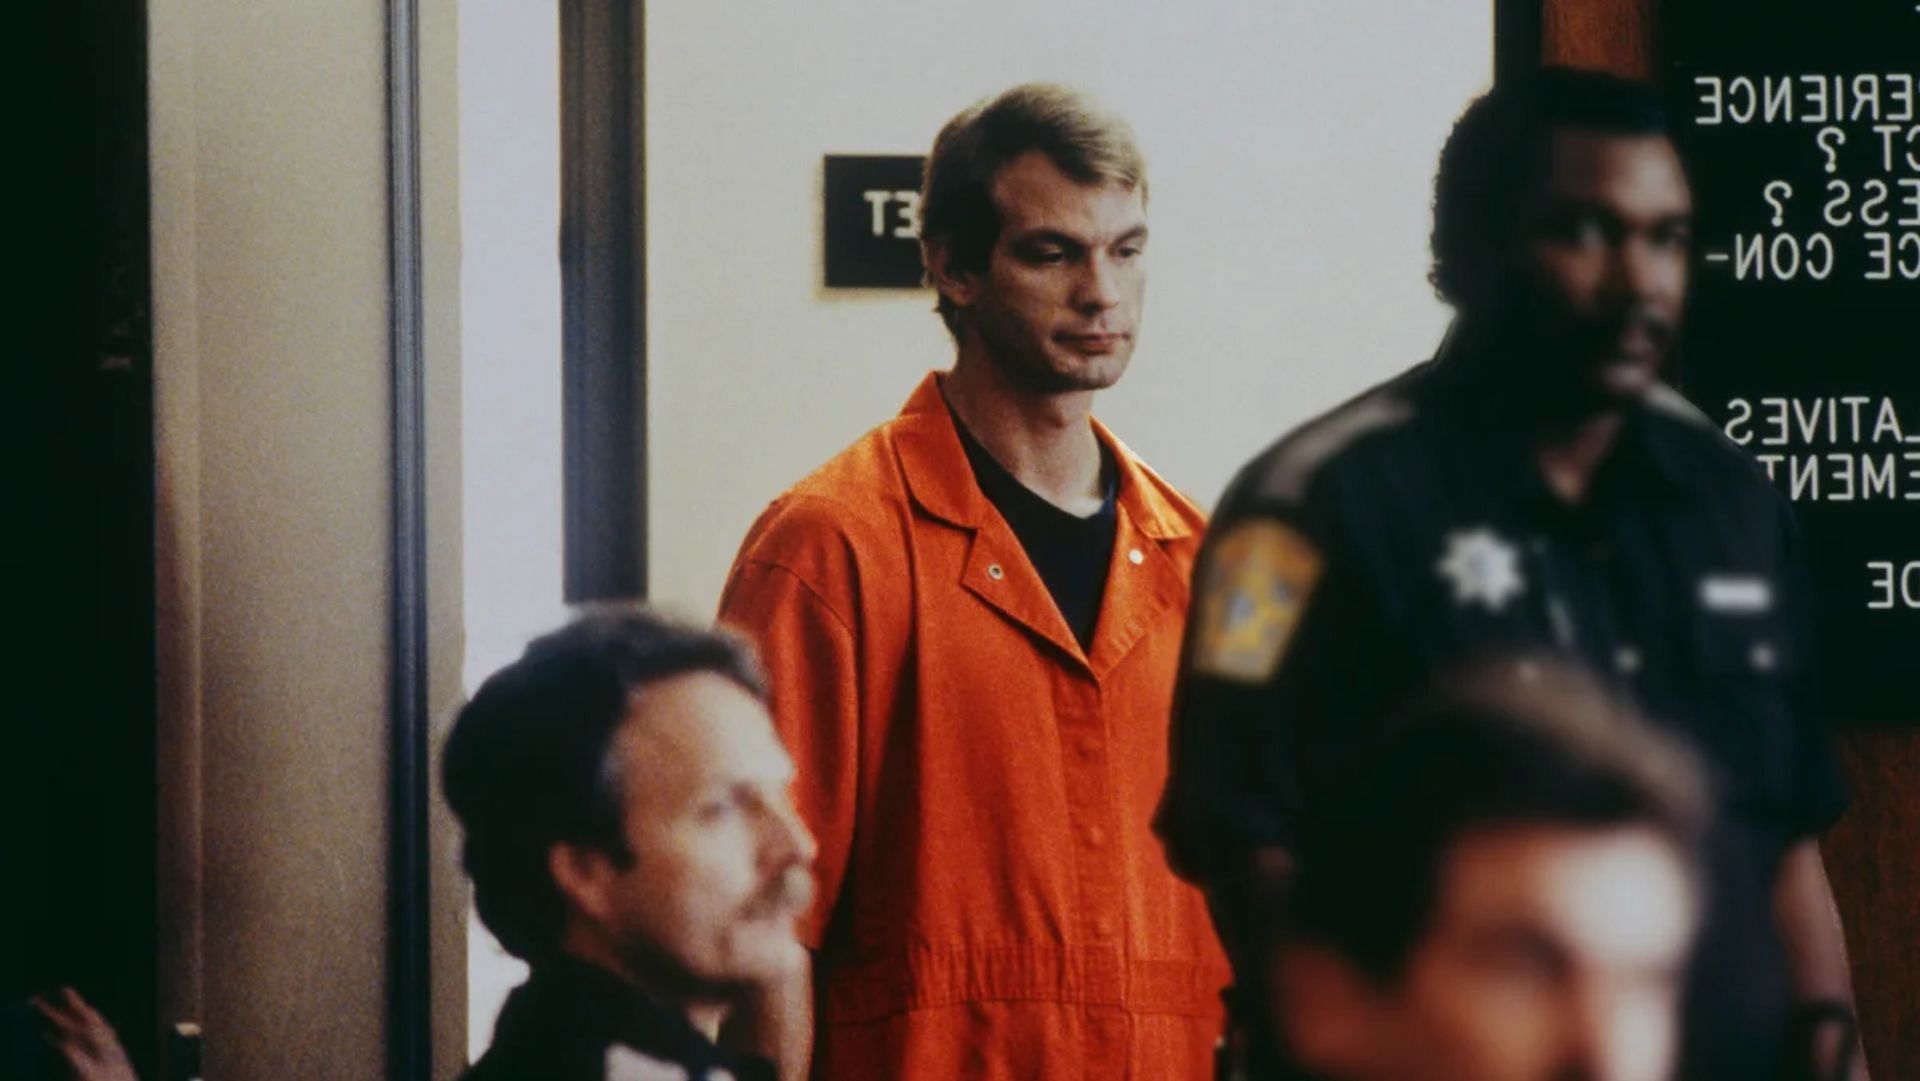 Jeffrey Dahmer started consuming alcohol at a very young age. (Image via Marny Malin/Getty Images)